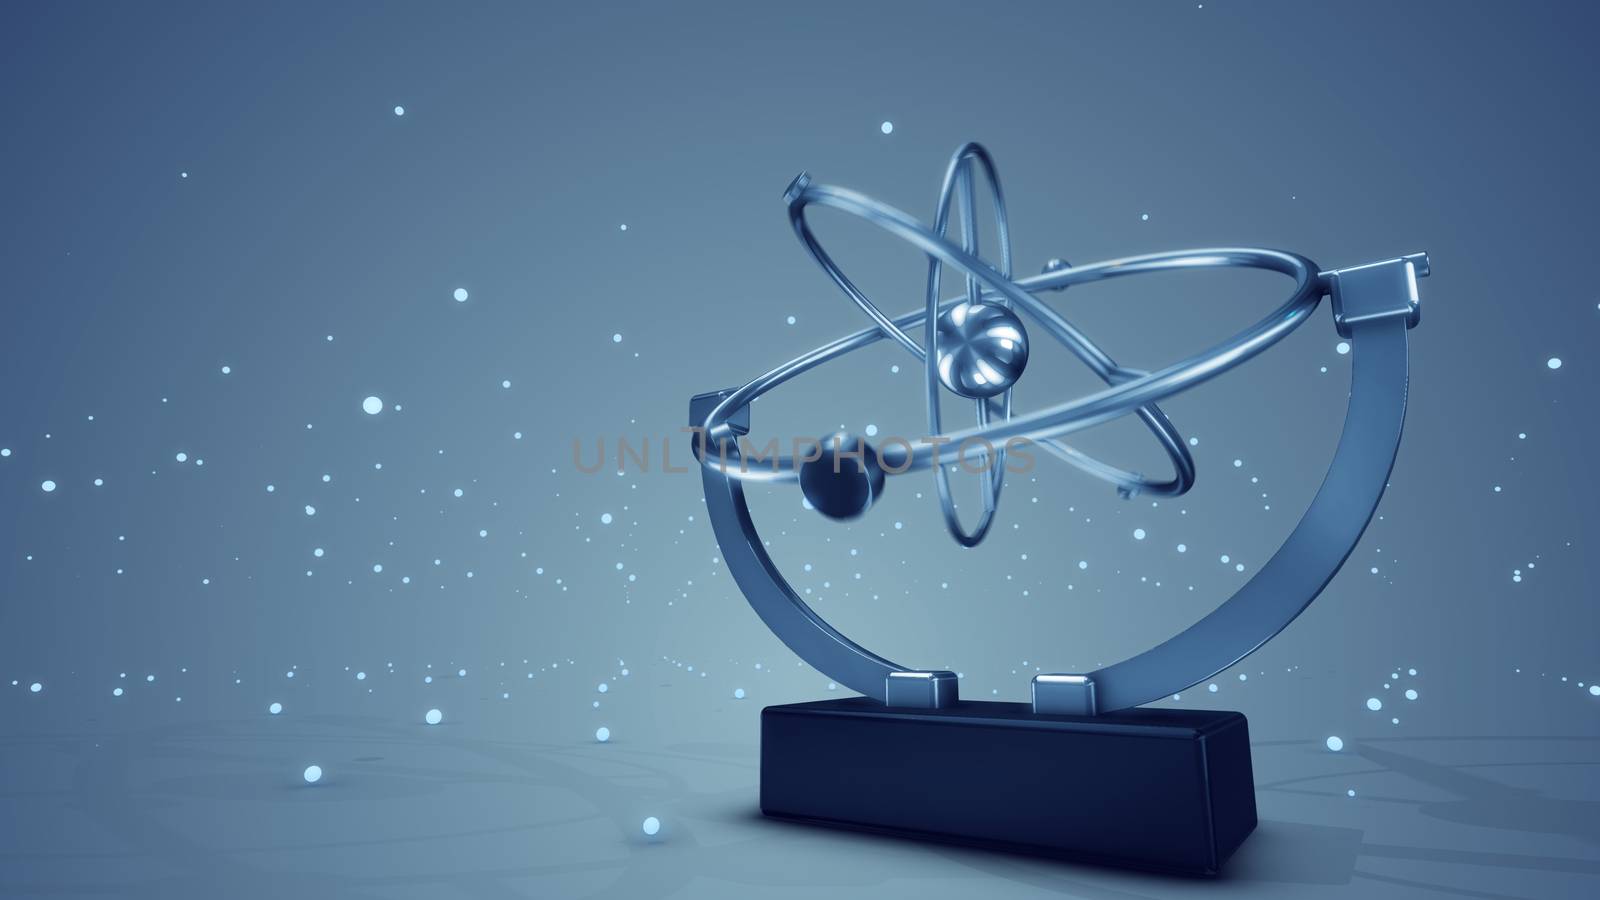 A holographic 3d illustration of a metallic pendulum swaying in three spheres in various directions with stars moving in the grey background. It looks sci-fi.